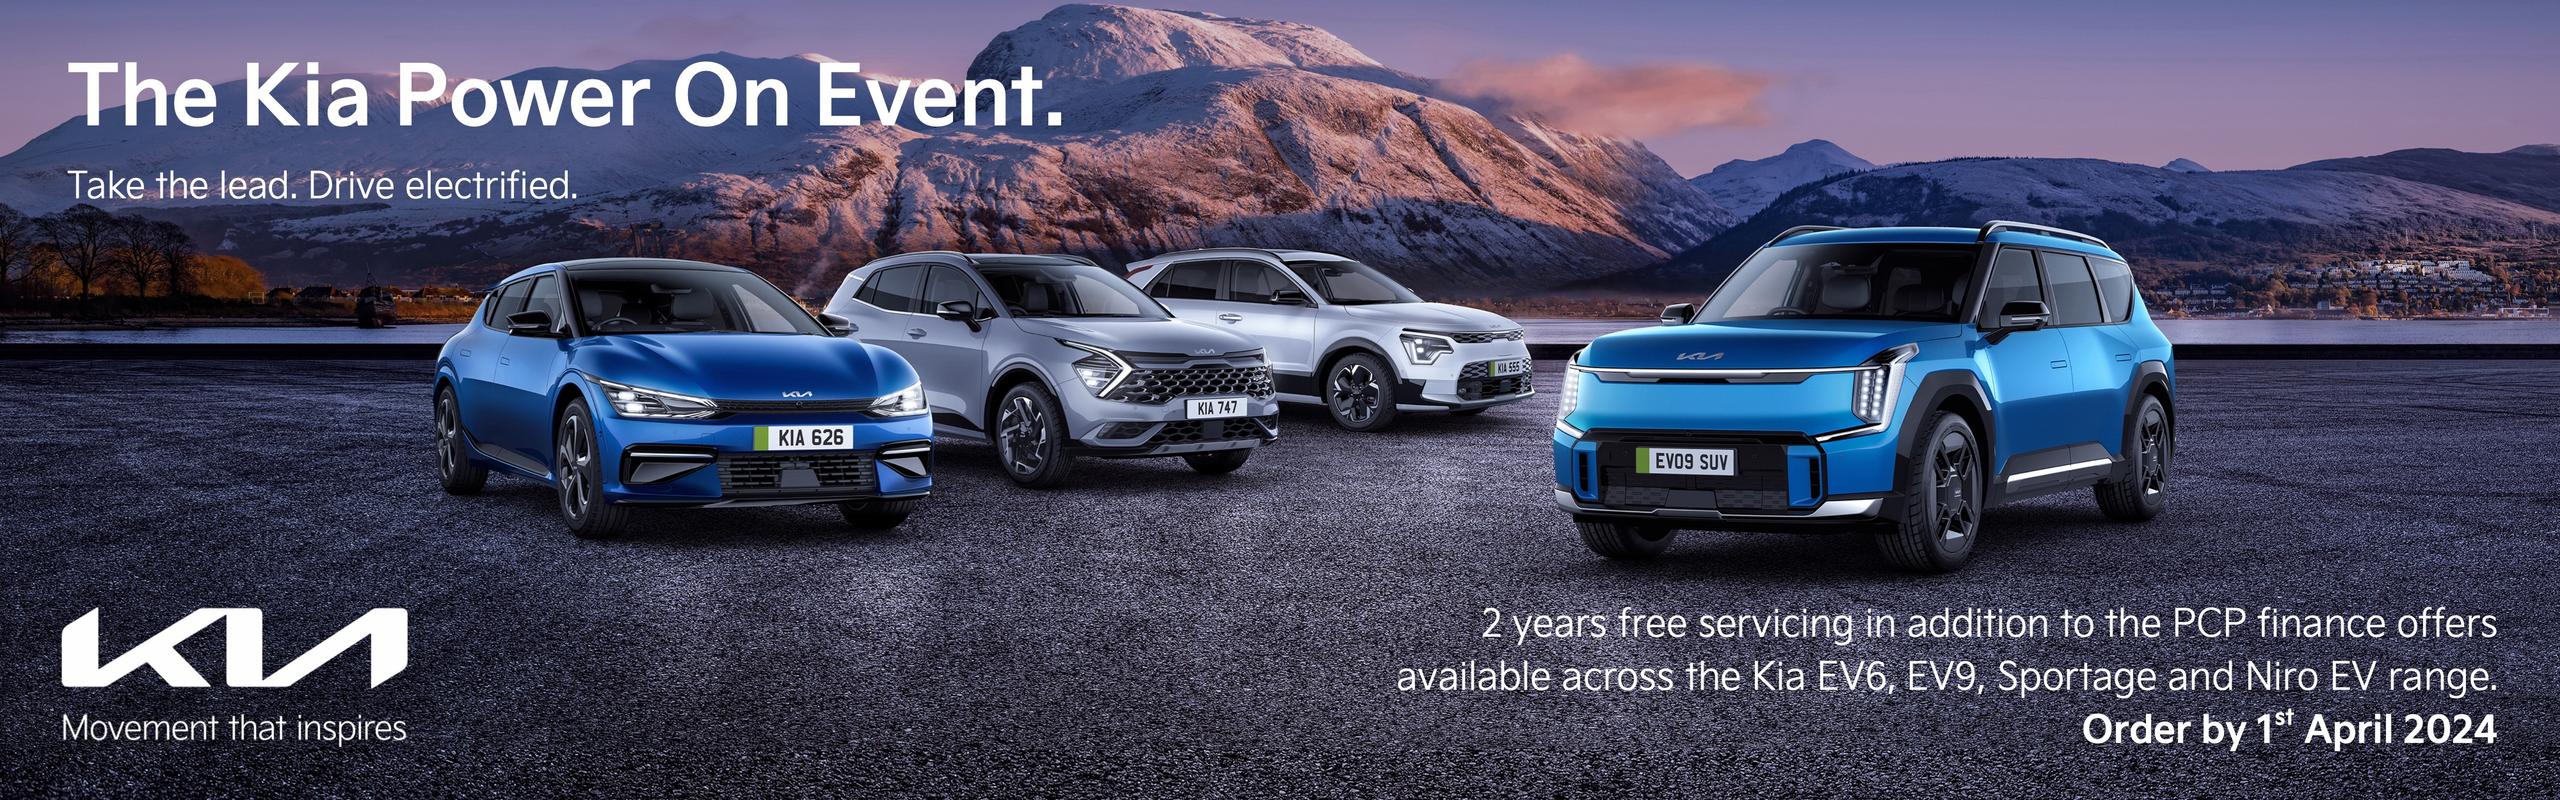 The Kia Loyalty Event. £1,000 off when you already own a Kia. Order by 13st December 2023